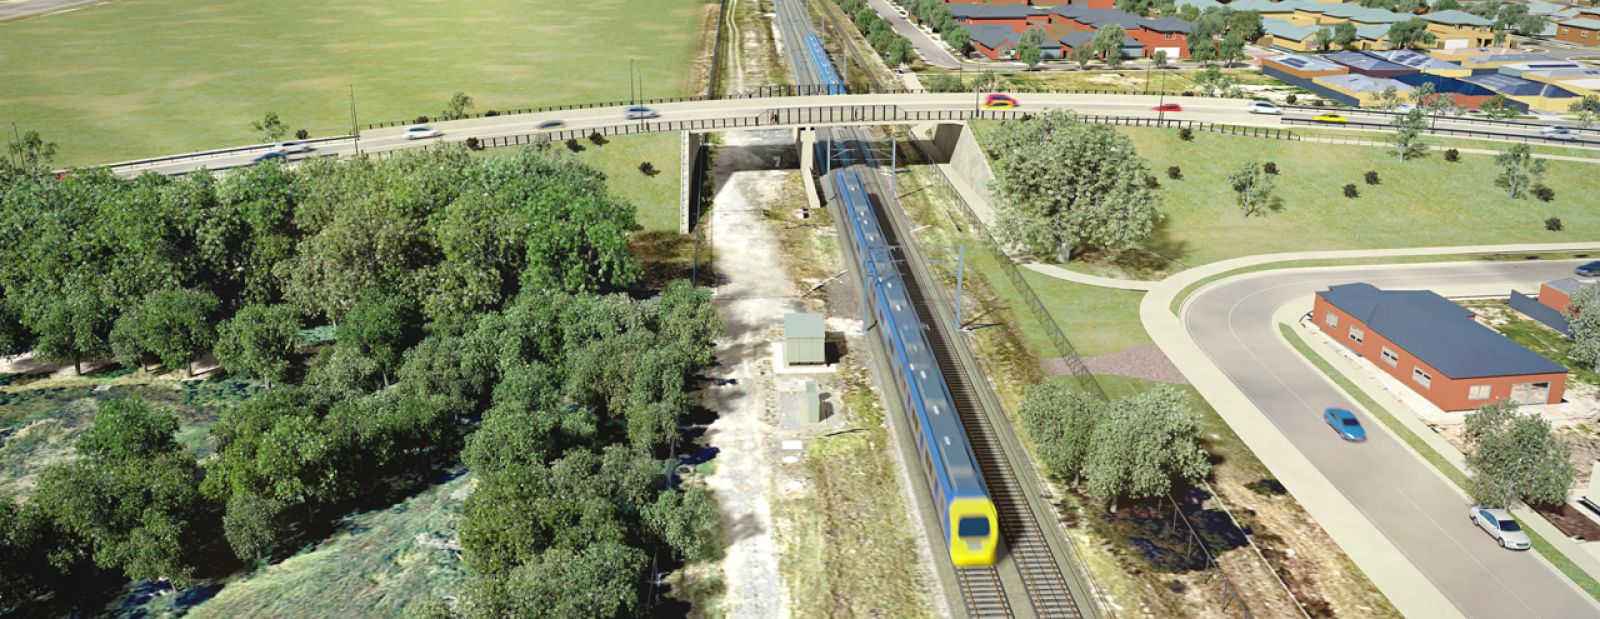 The new Brunt Road bridge will travel north to south above the Pakenham Line. Artist impression, subject to change.